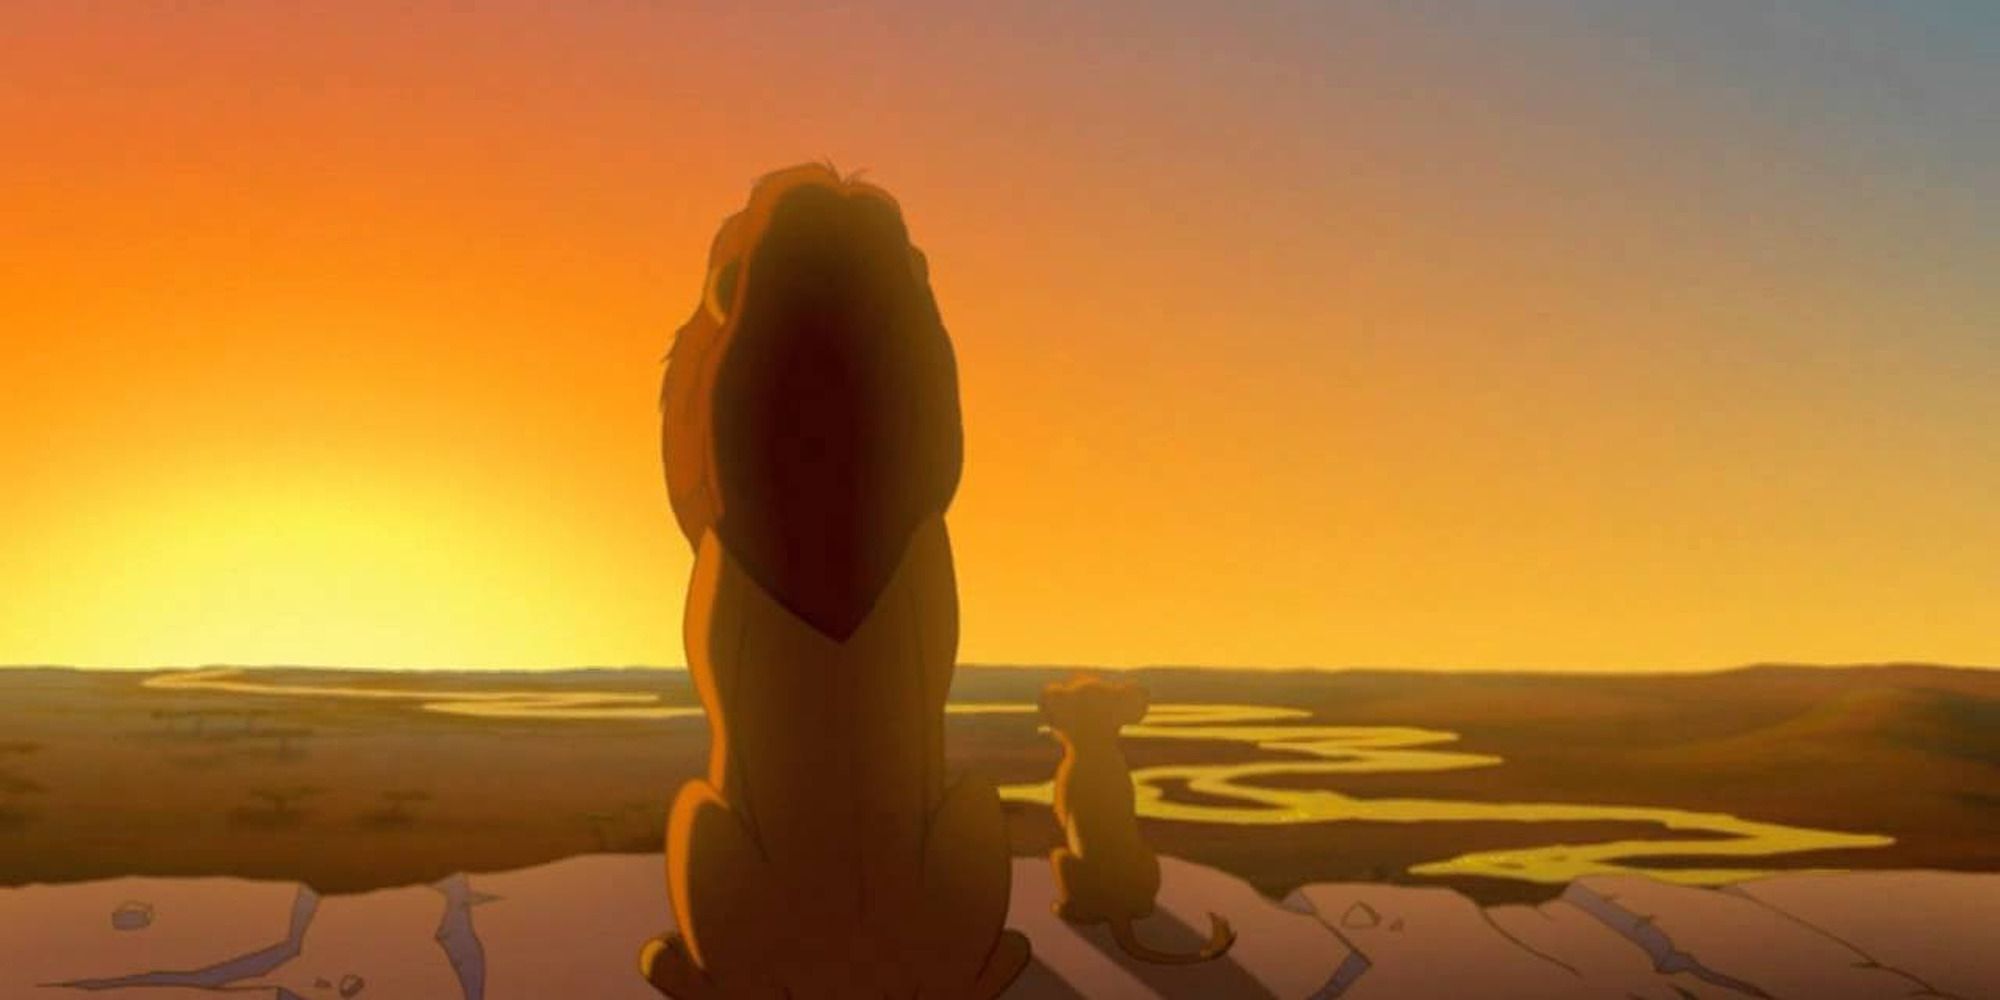 Mufasa and Simba from "The Lion King" (1994), staring down a cliff into the sunset